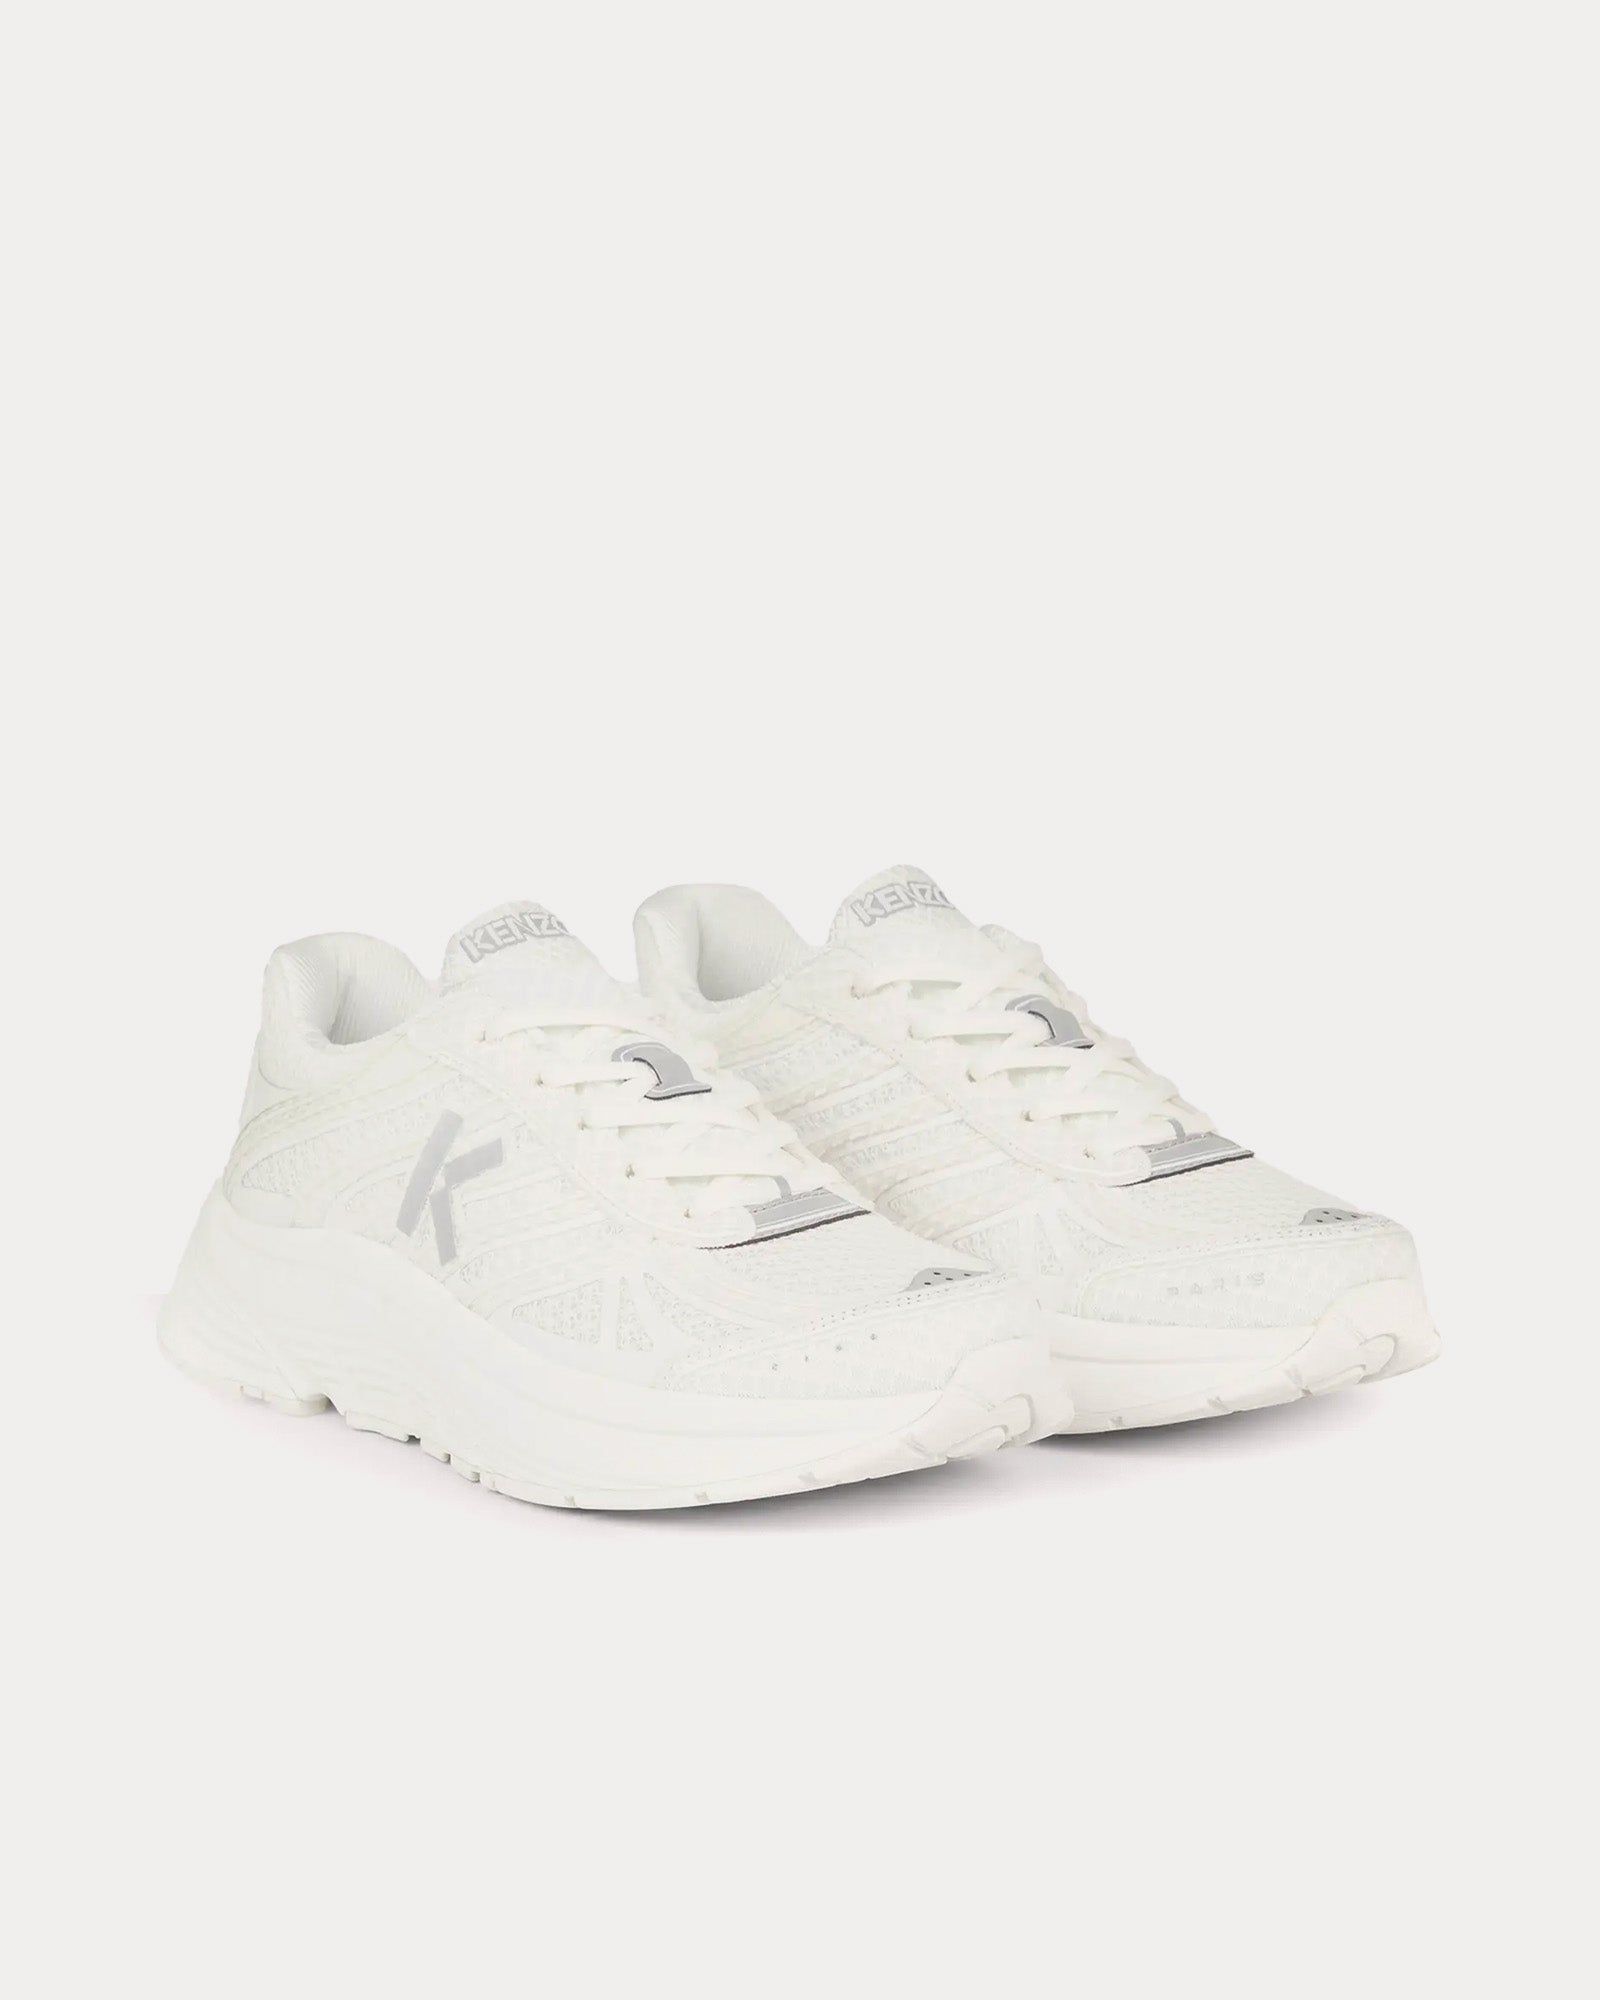 Kenzo - Pace Tech Runner White Low Top Sneakers